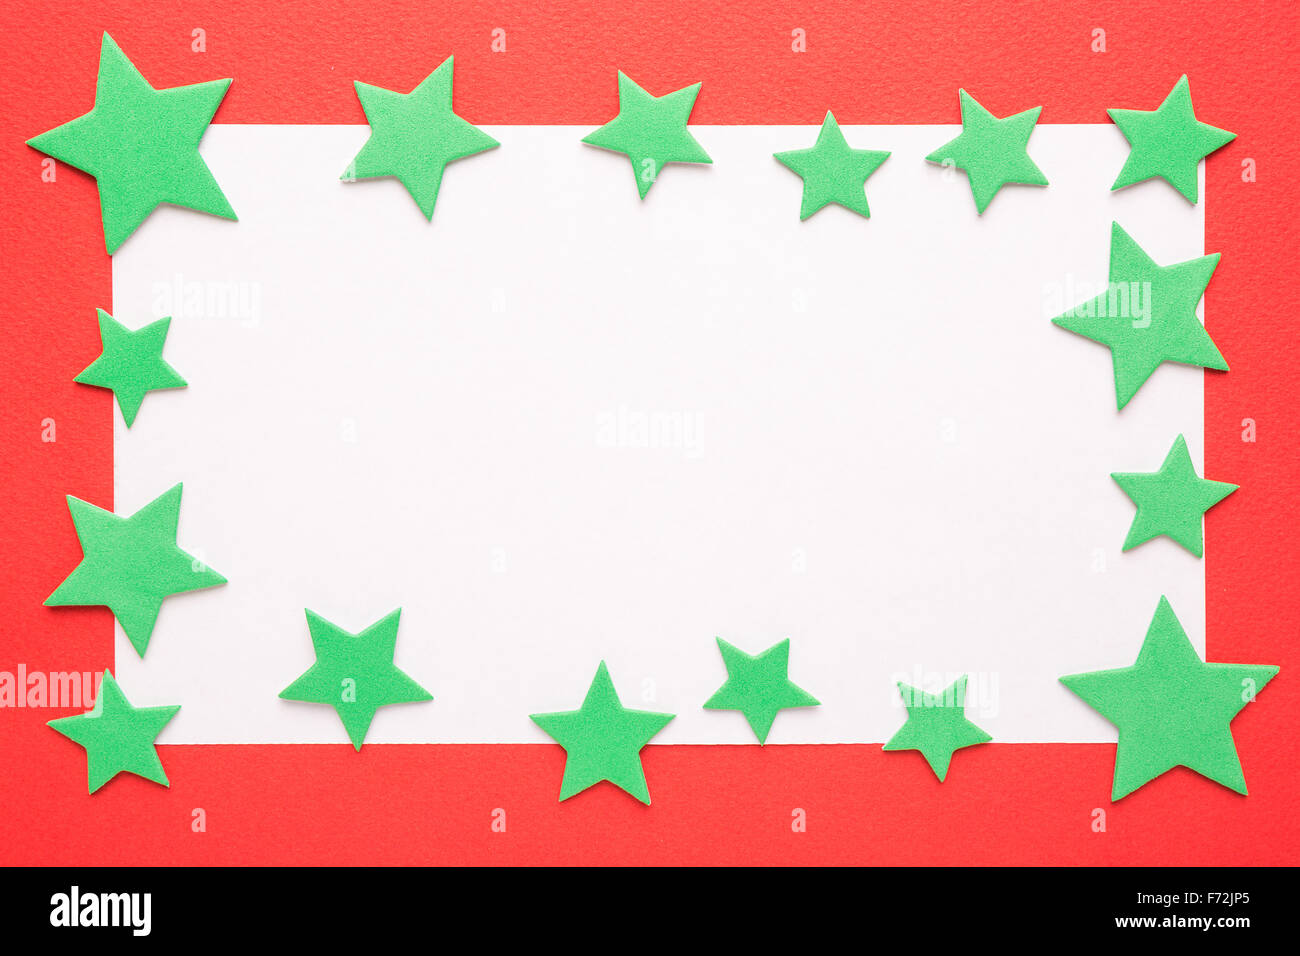 Blank Christmas card or invitation with green stars on red background Stock Photo